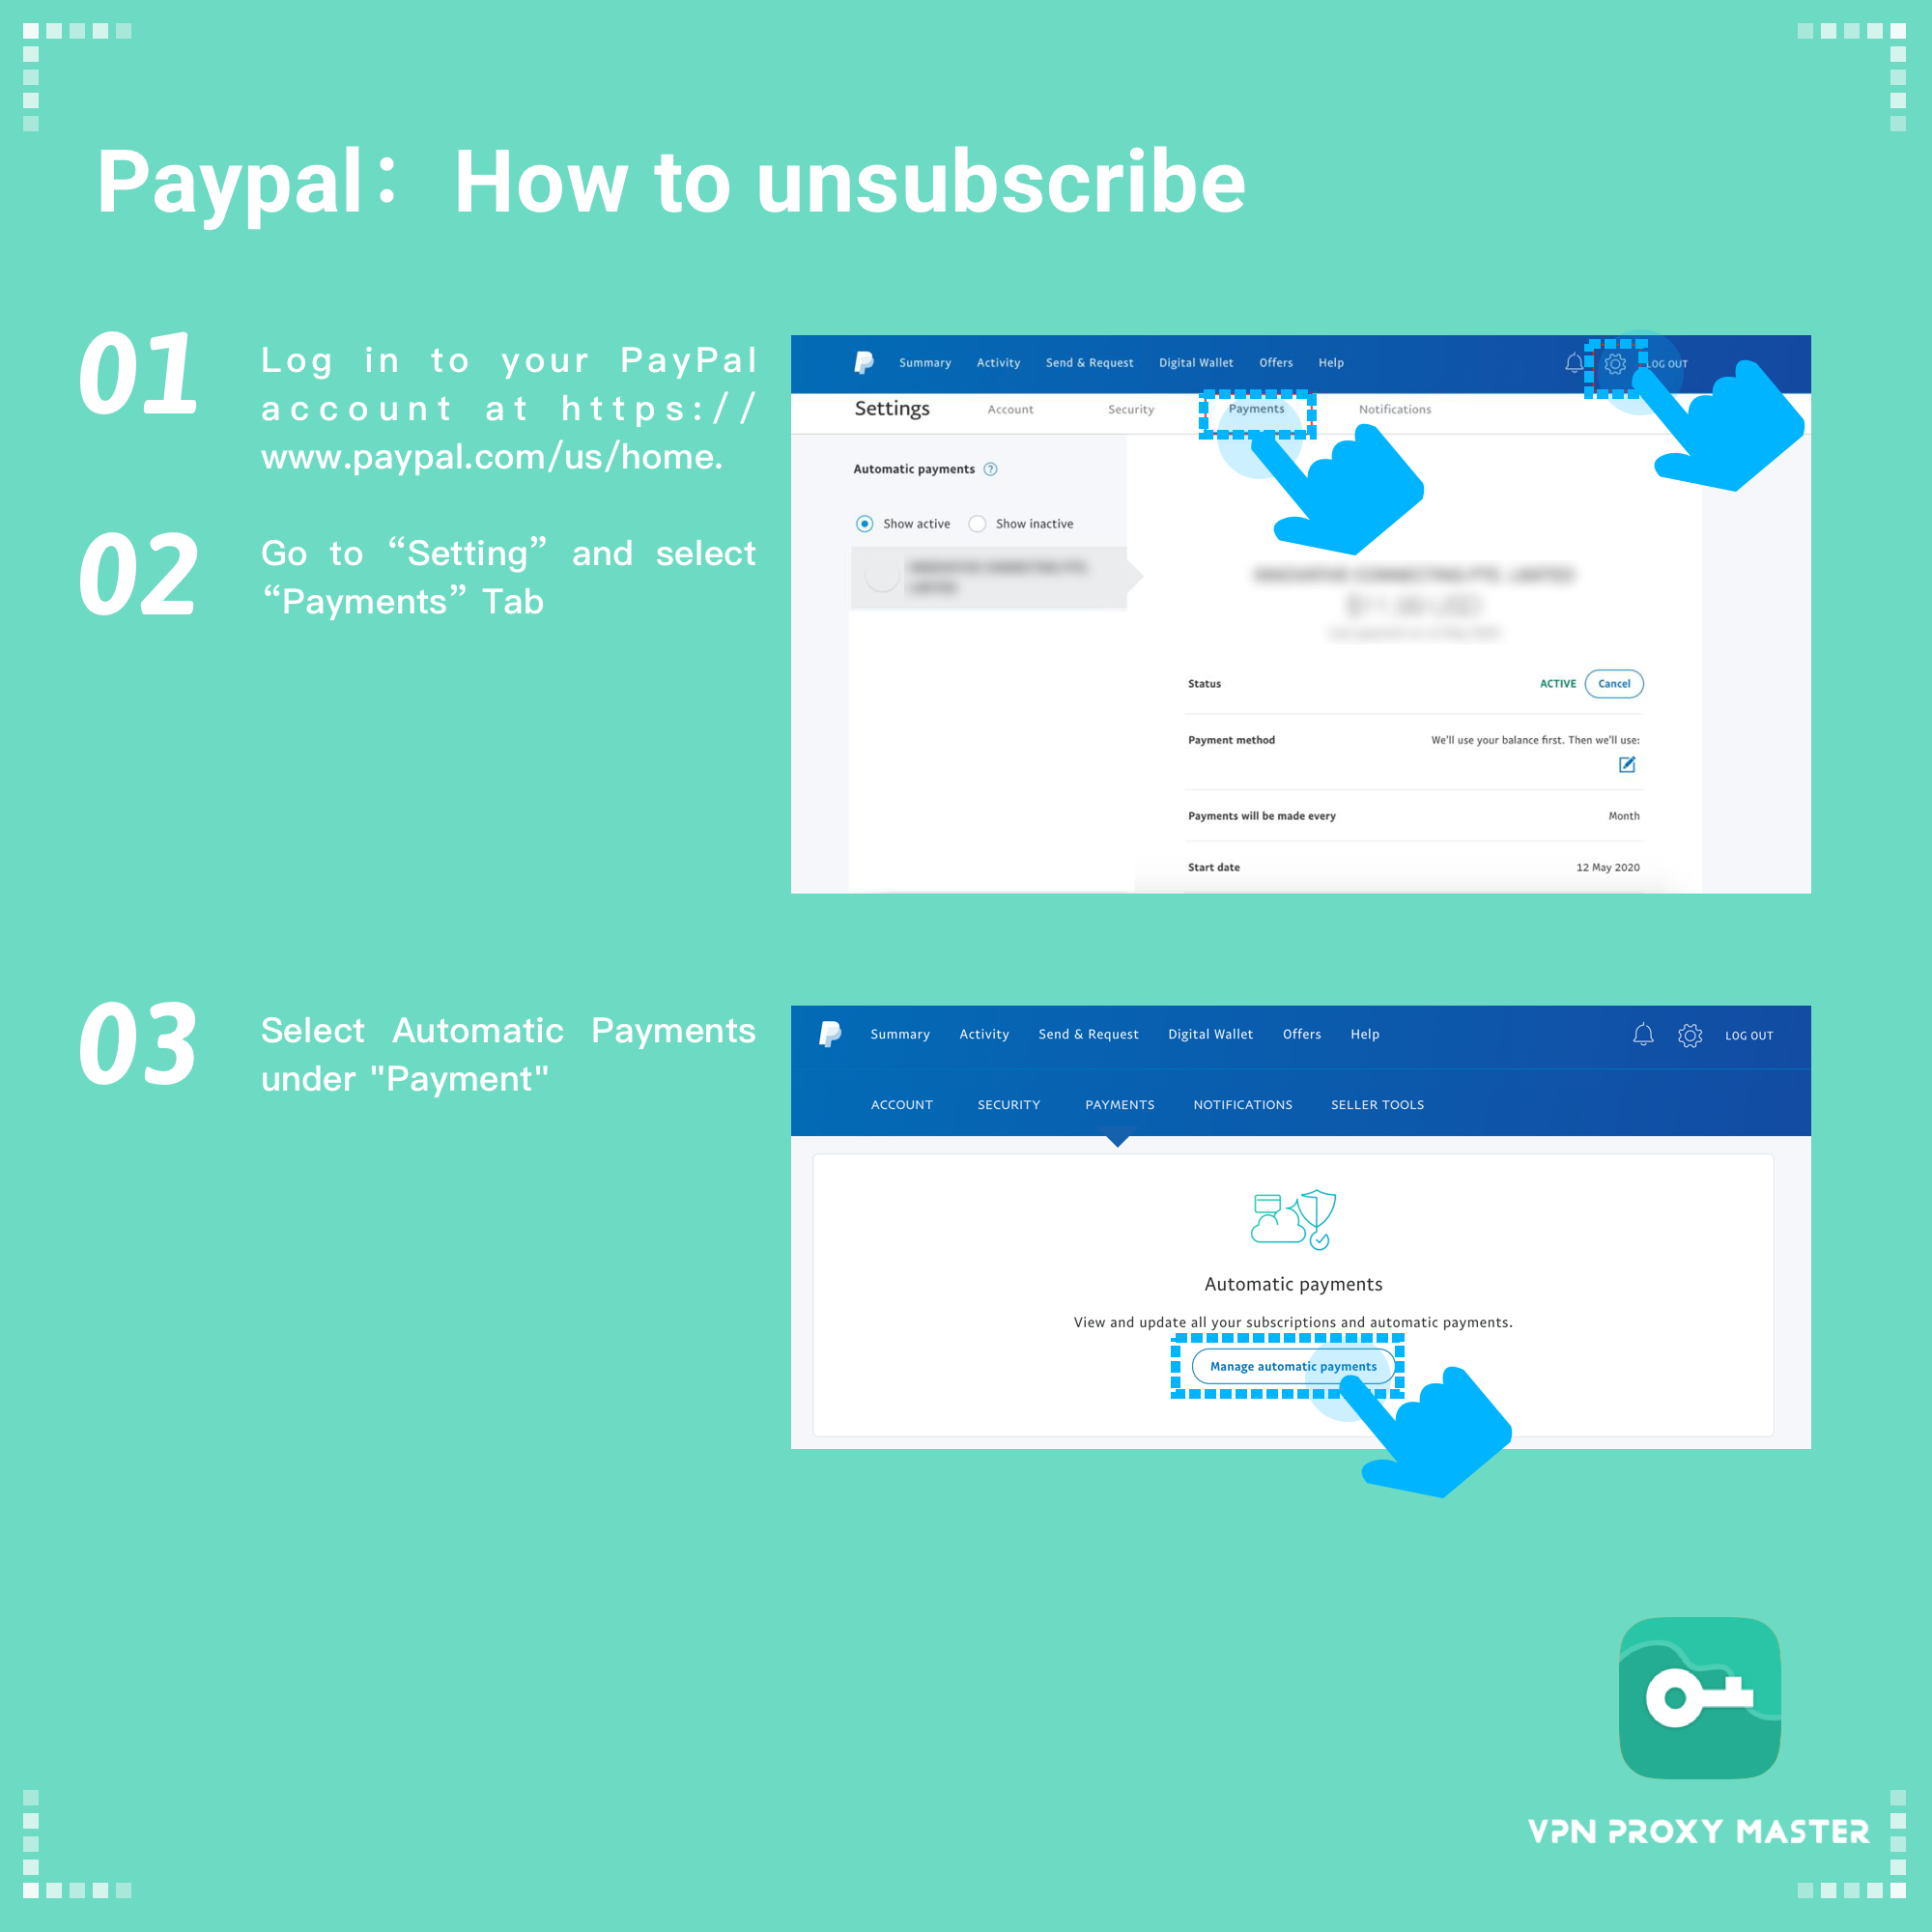 Paypal_How_to_unsubscribe.png